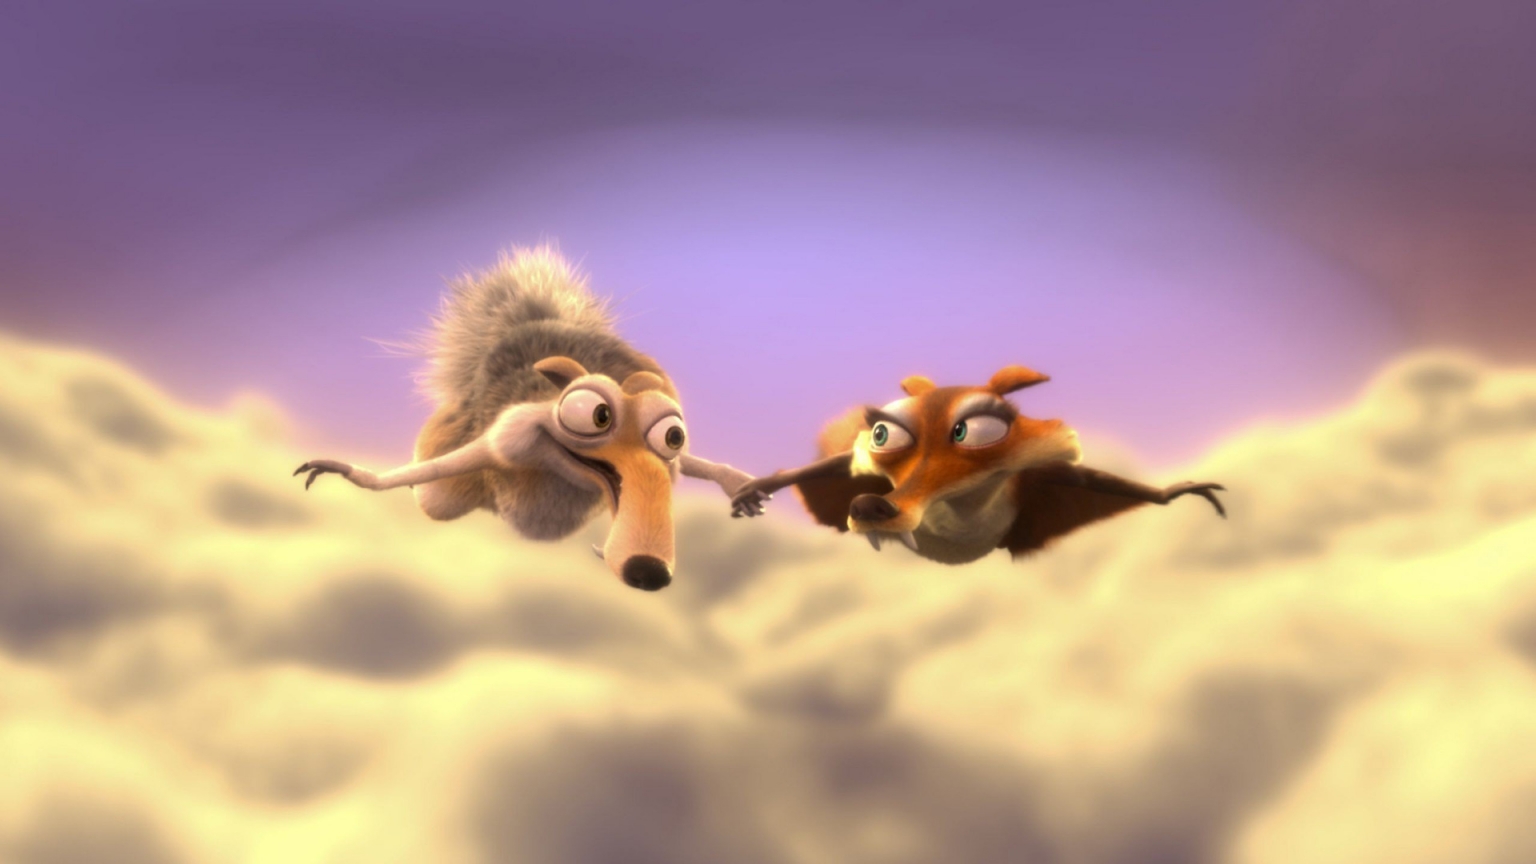 Scrat and Scratte for 1536 x 864 HDTV resolution